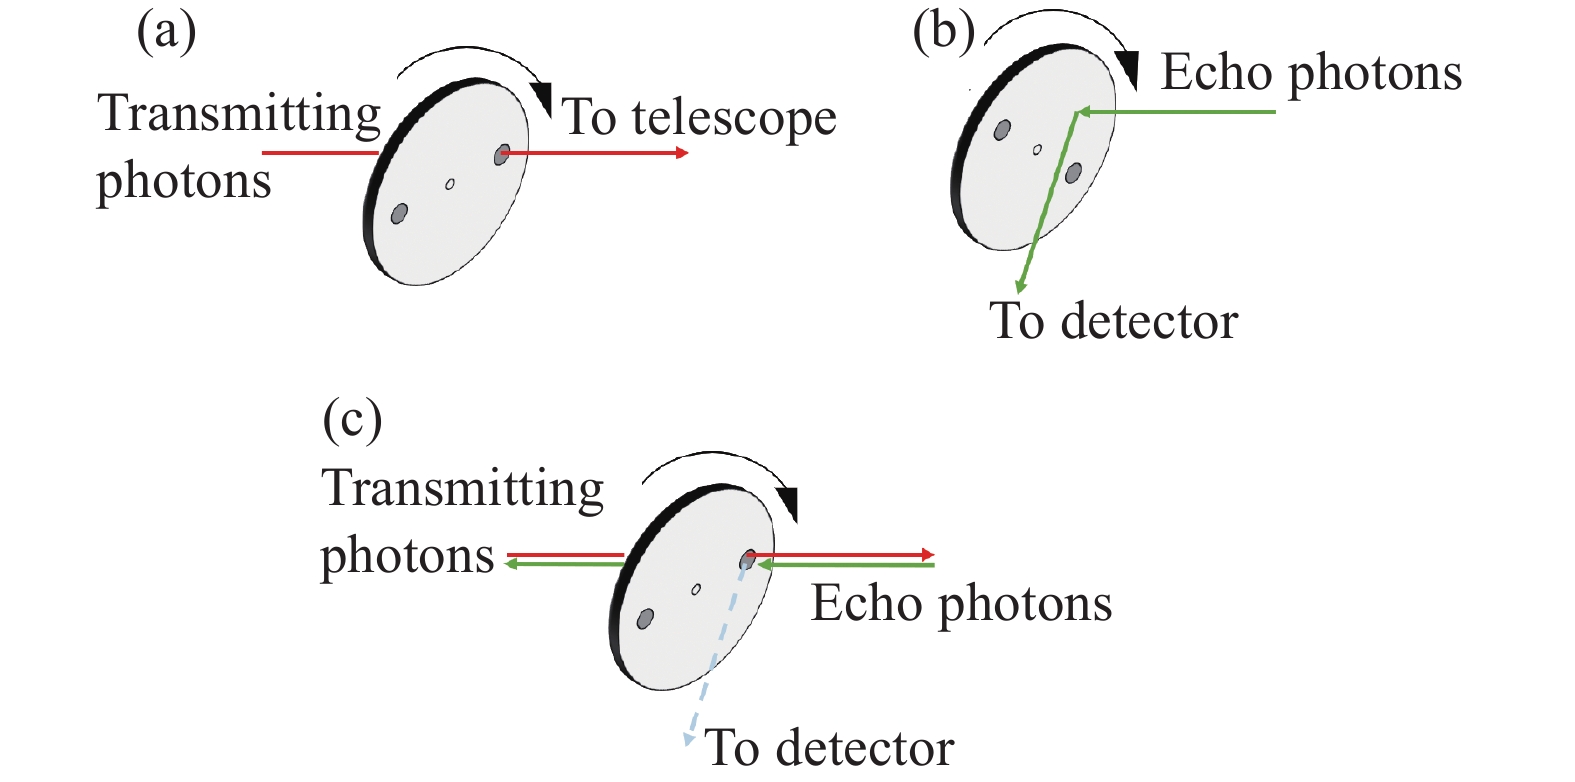 Rotating mirror’s position and transmitting/echo signal overlapping. (a) Normal transmitting; (b) normal receiving; (c) transmitting/echo signal overlapping